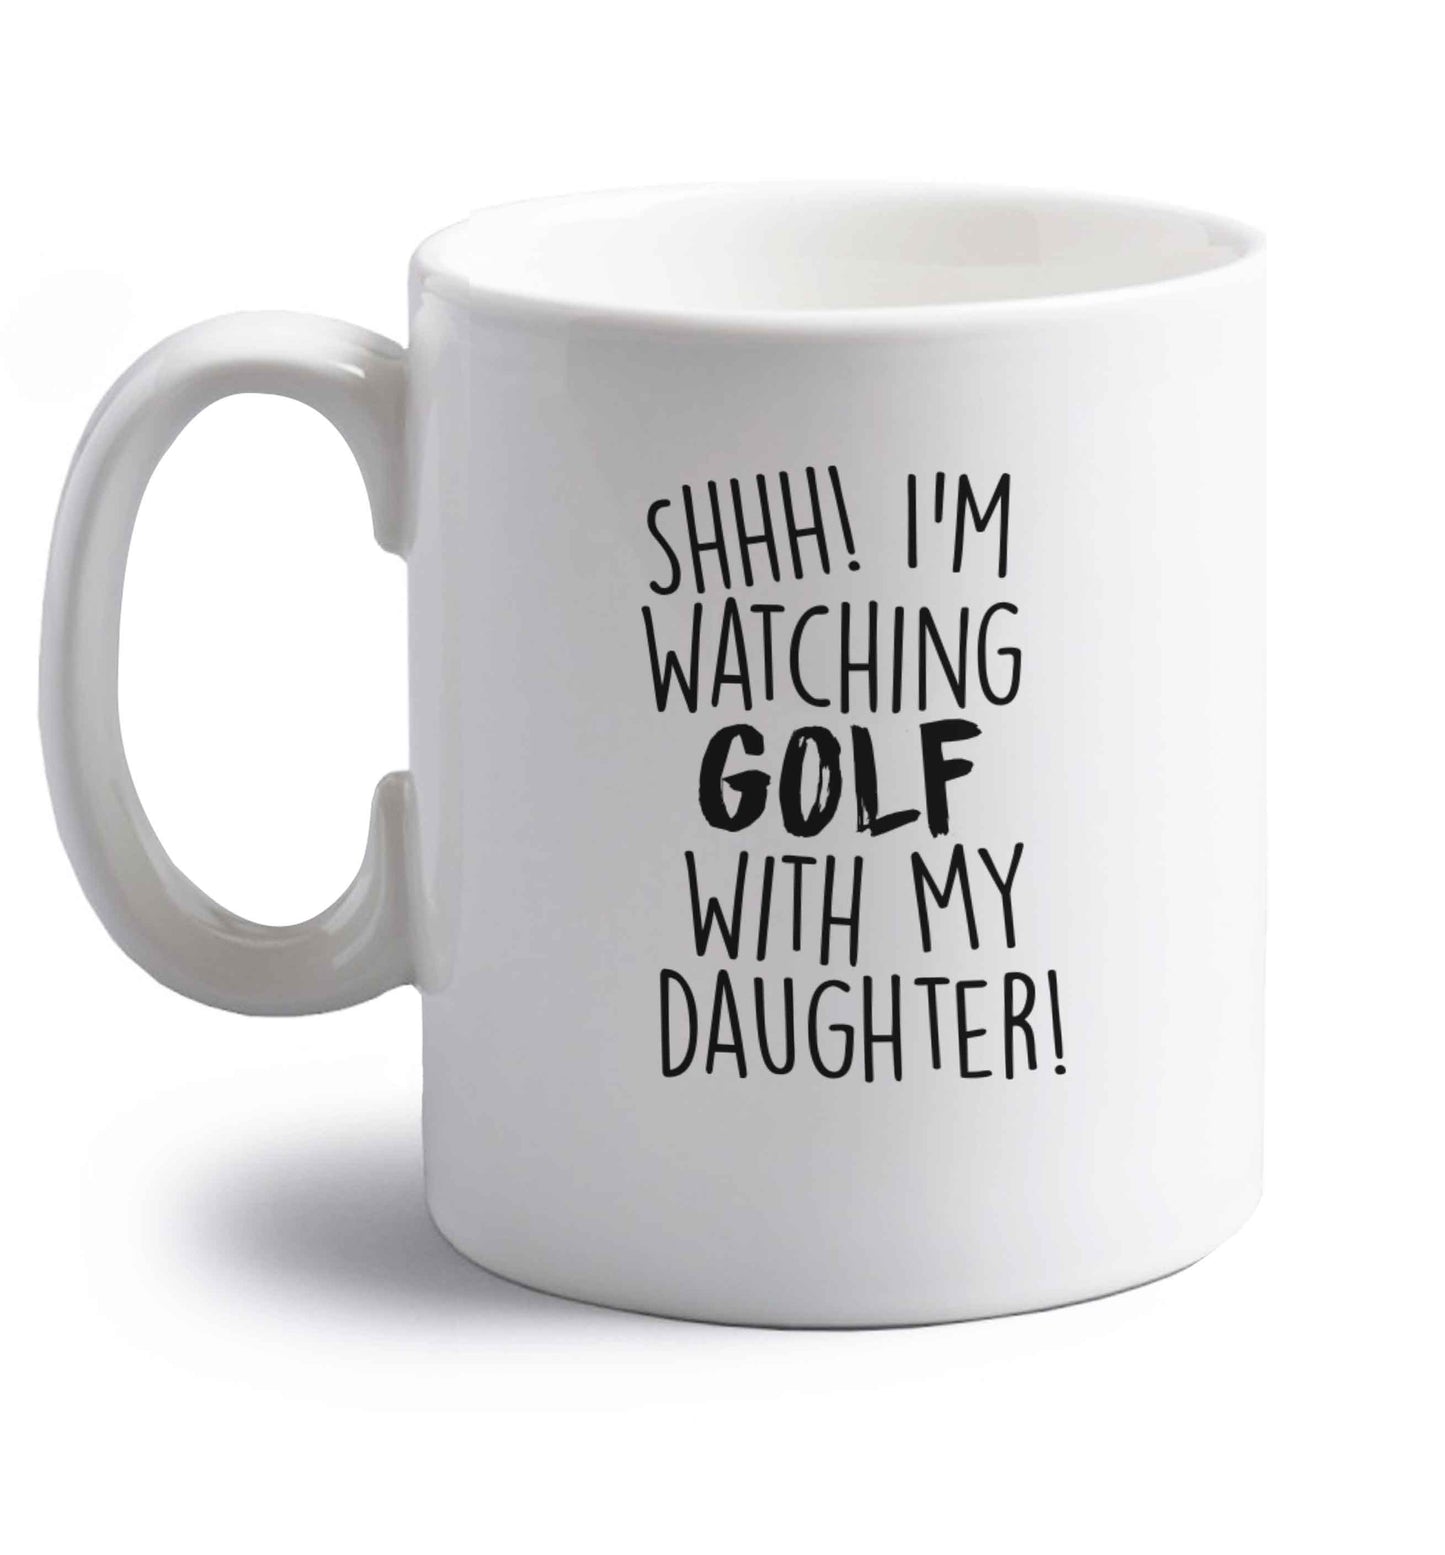 Shh I'm watching golf with my daughter right handed white ceramic mug 